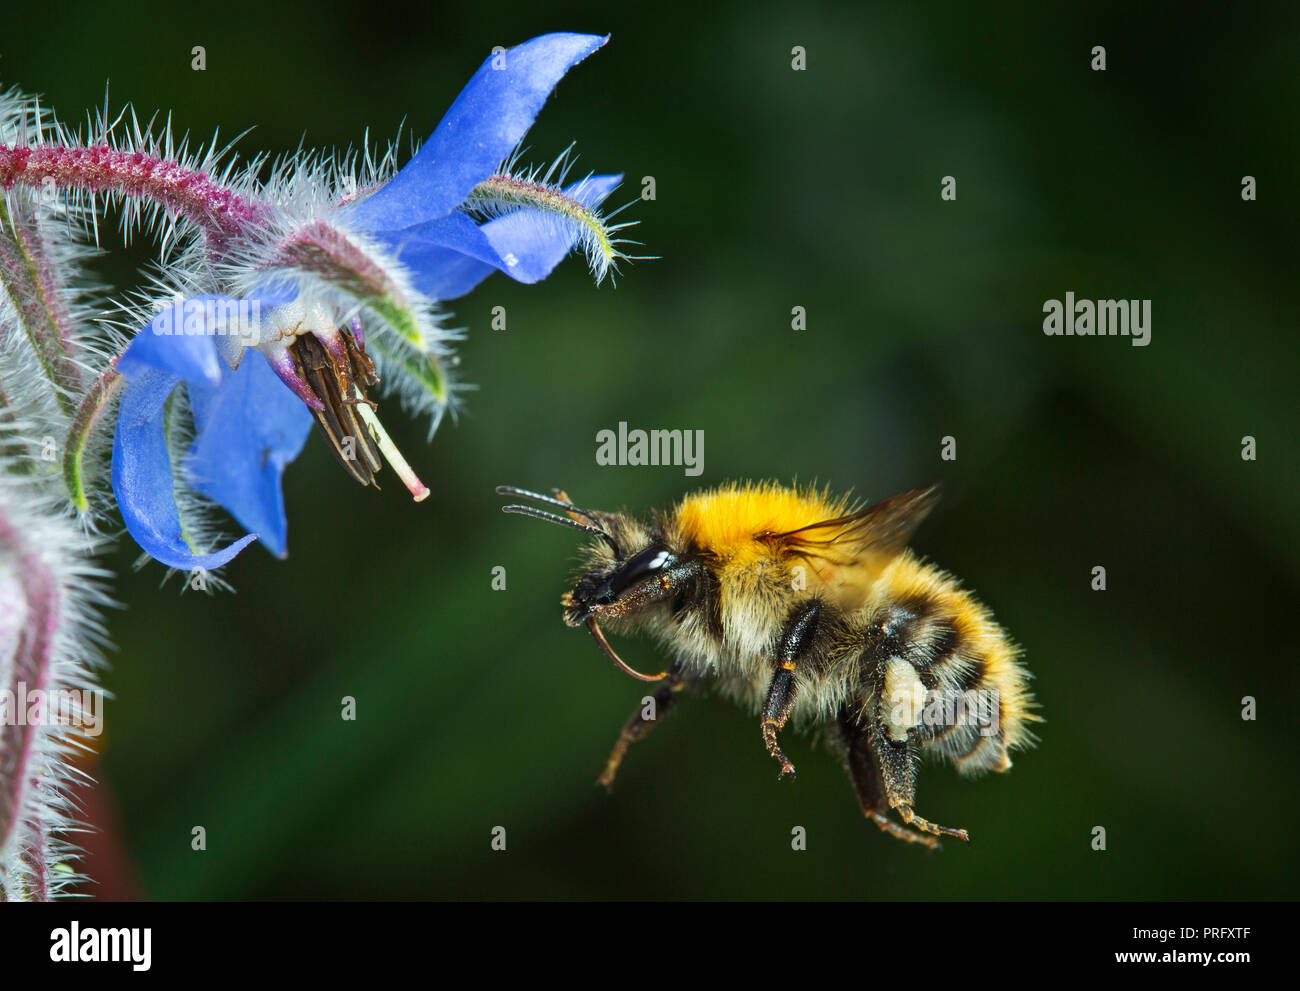 Common carder bumblebee approaching borage flower Stock Photo